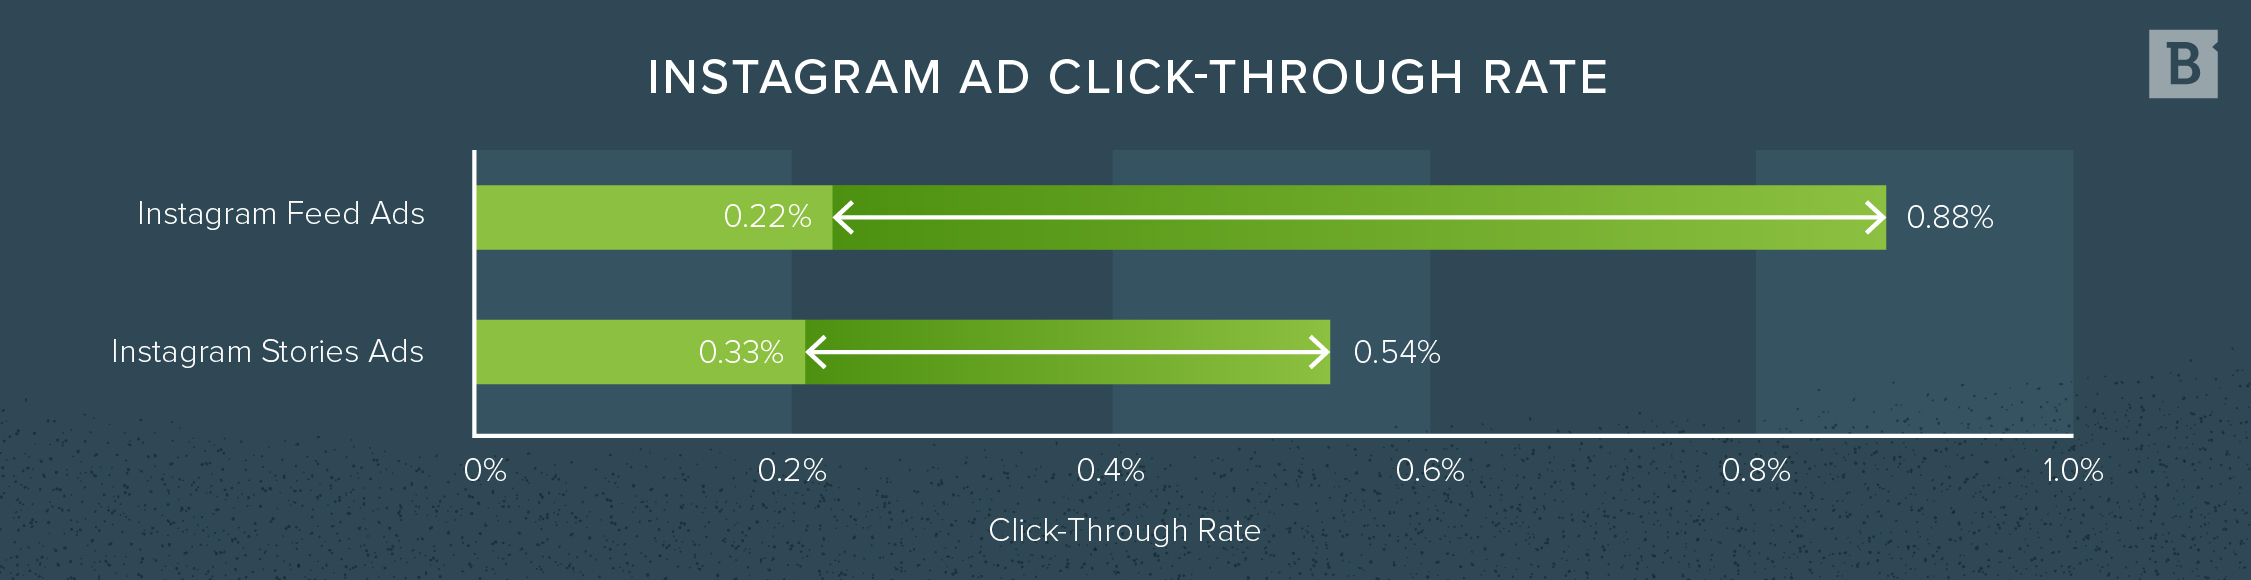 Instagram ad click through rate by rate